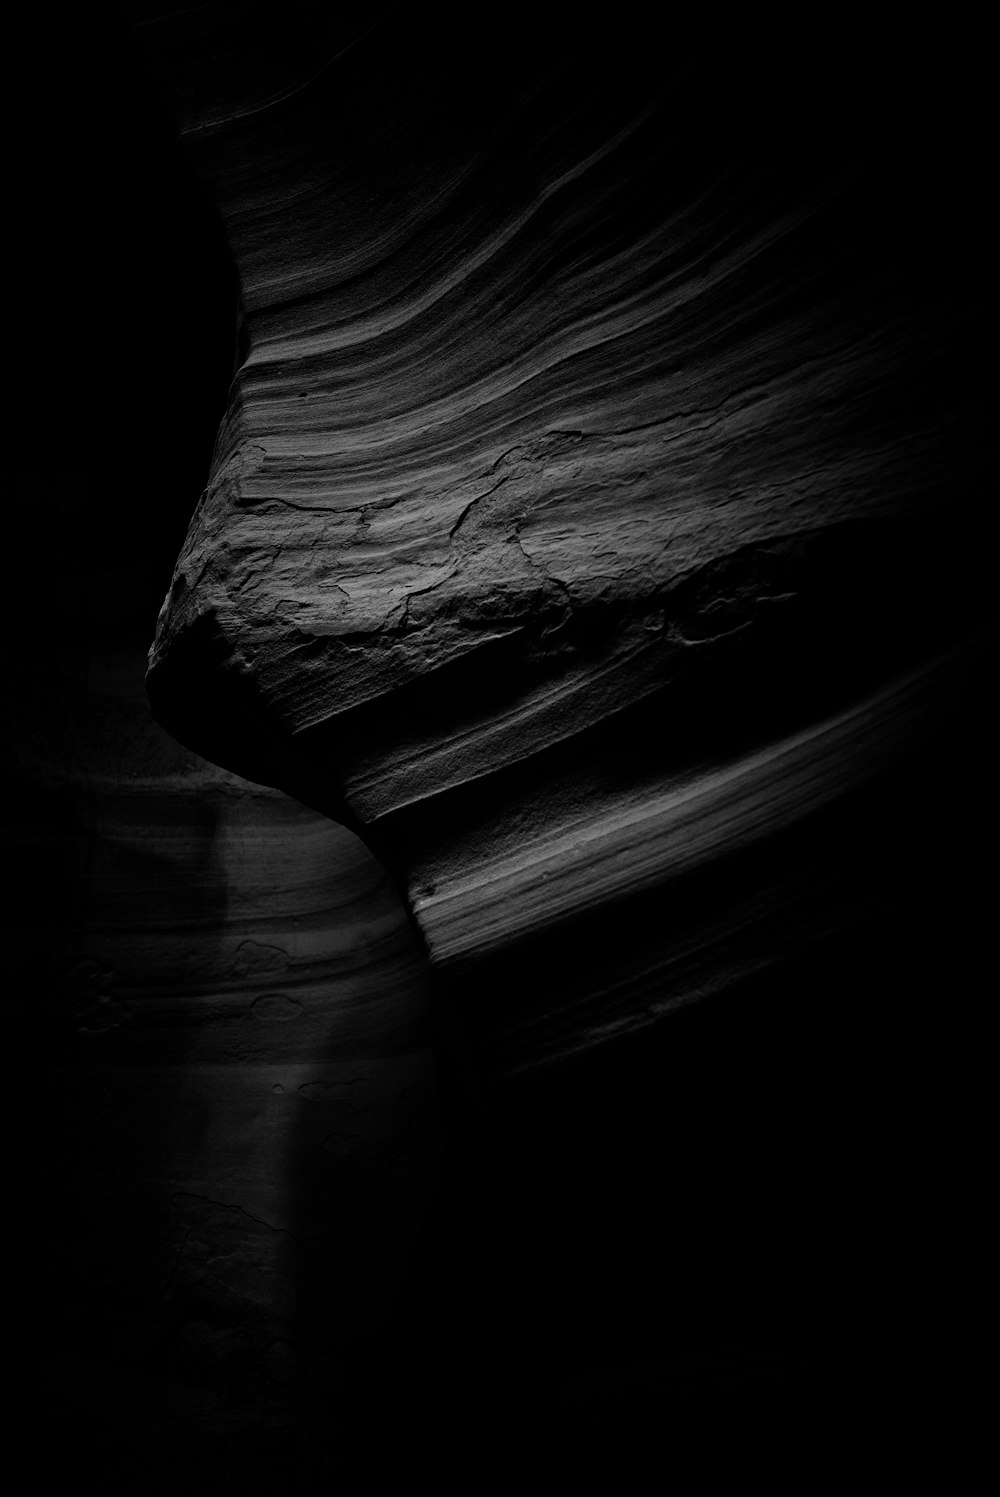 a black and white photo of a rock formation